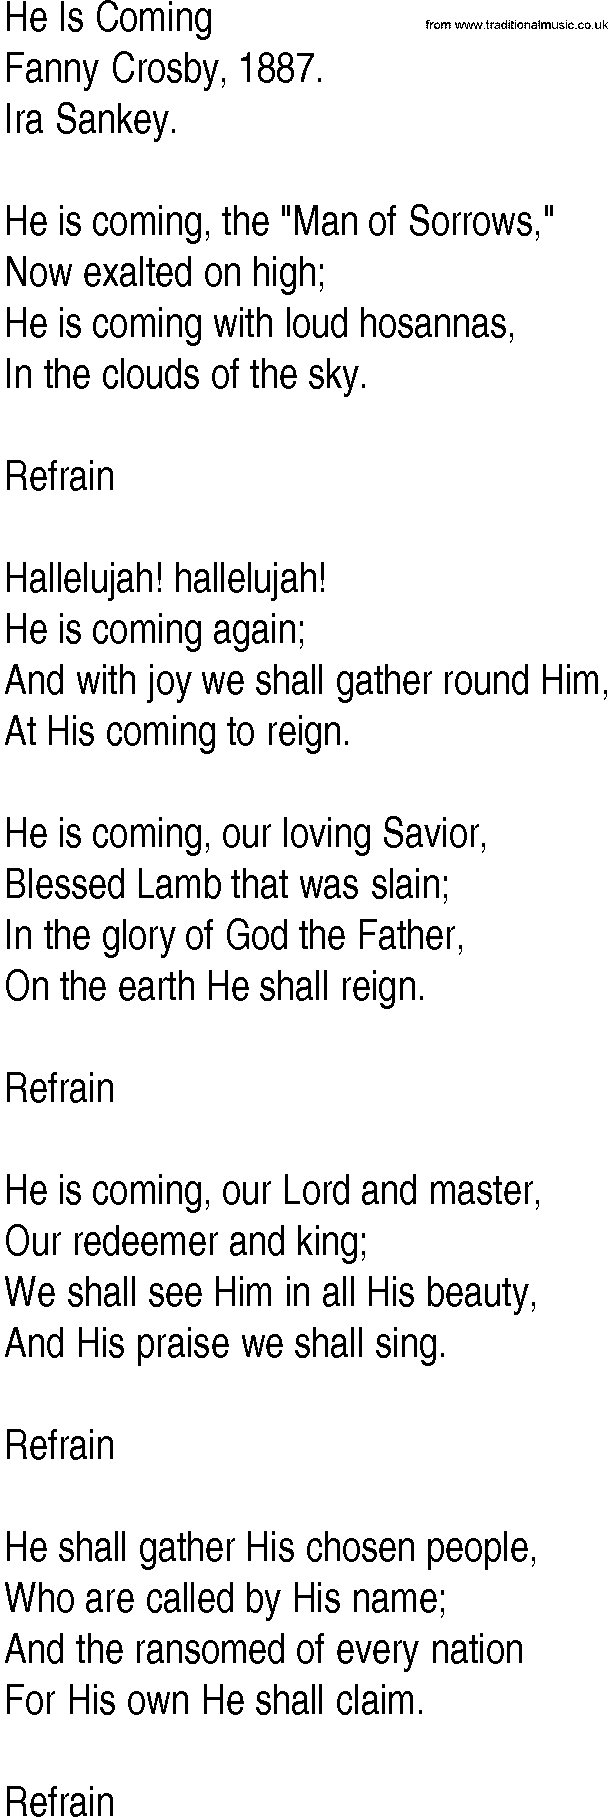 Hymn and Gospel Song: He Is Coming by Fanny Crosby lyrics